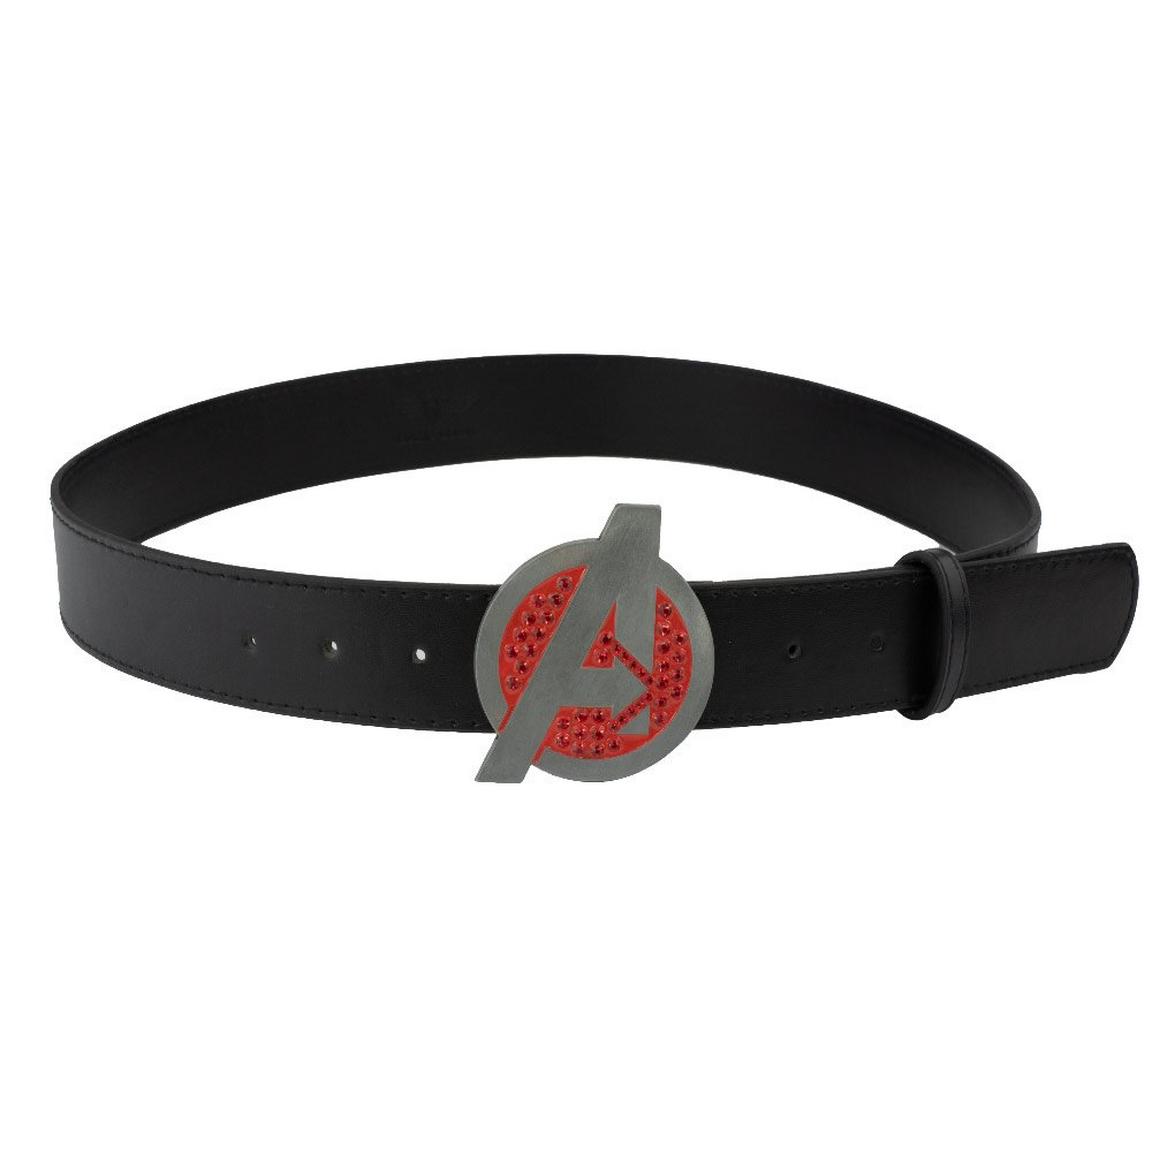 Buckle-Down Marvel Avengers Logo with Red Crystal Rhinestones Black Vegan Leather Belt, Size: Small, Buckle Down